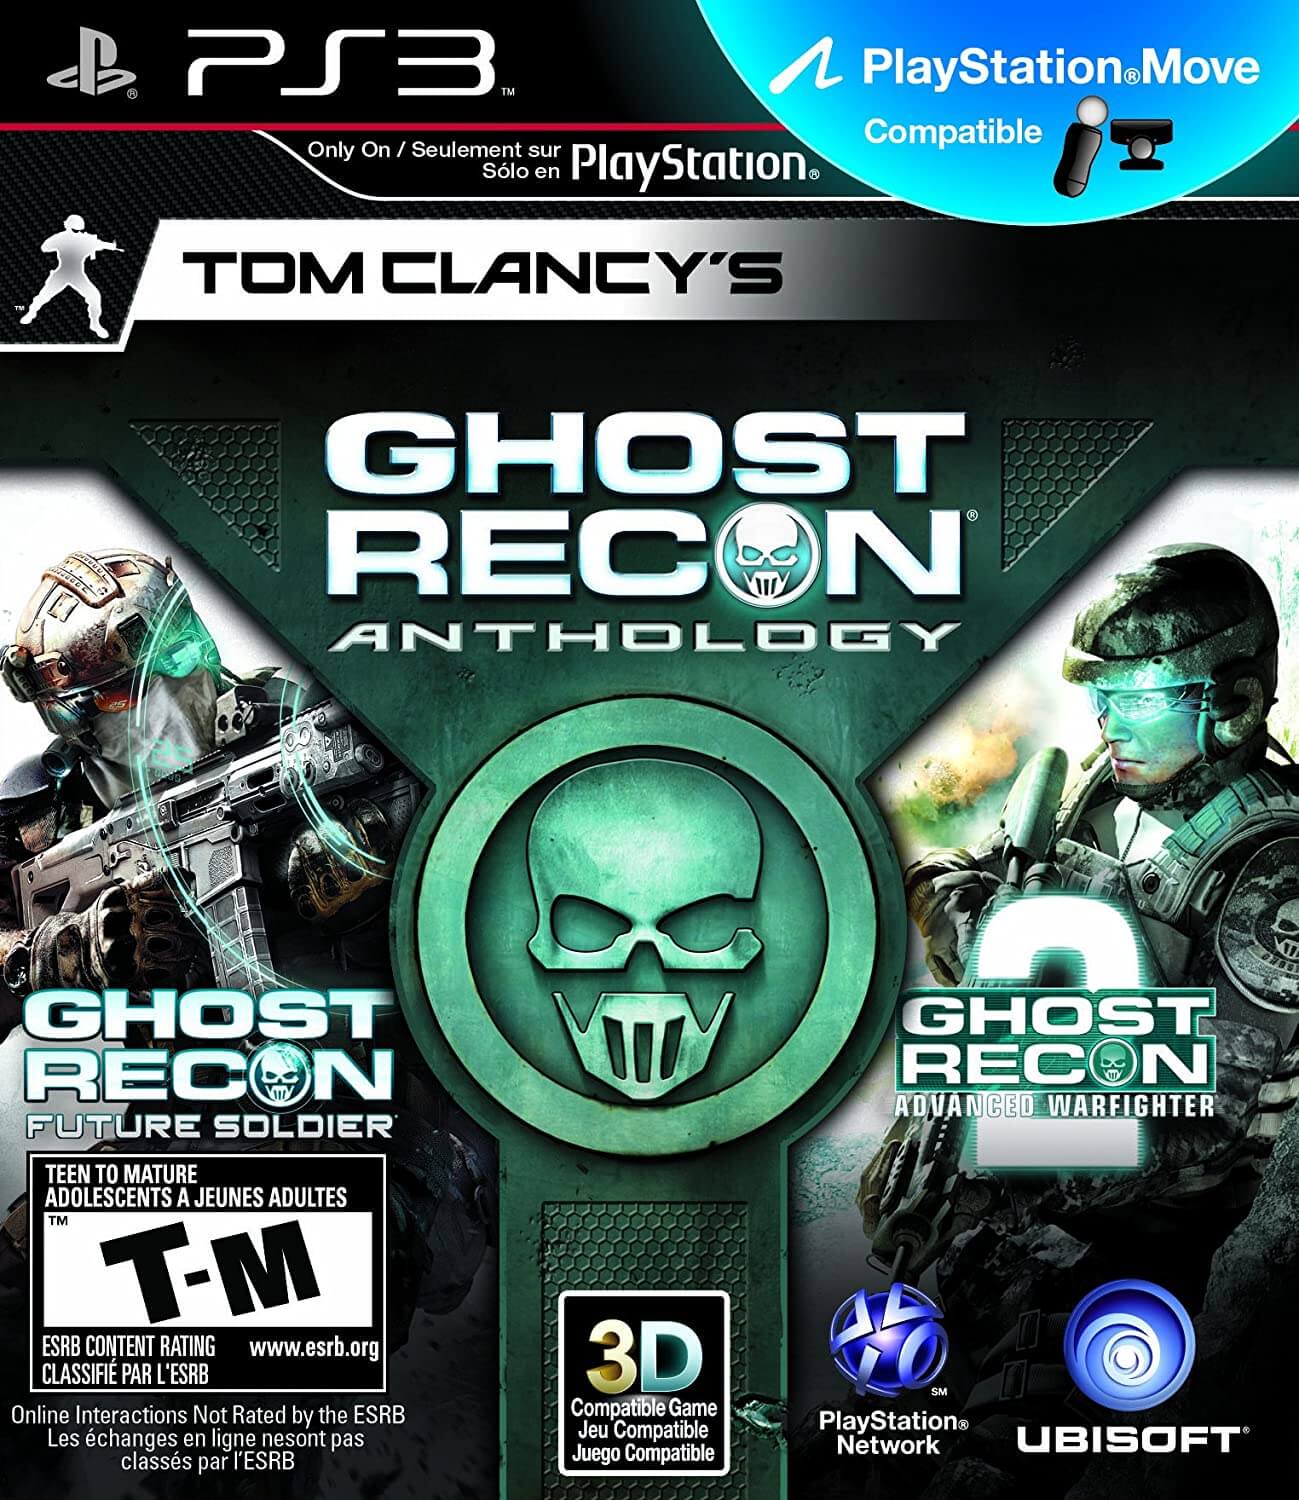 Tom Clancy’s Ghost Recon Anthology